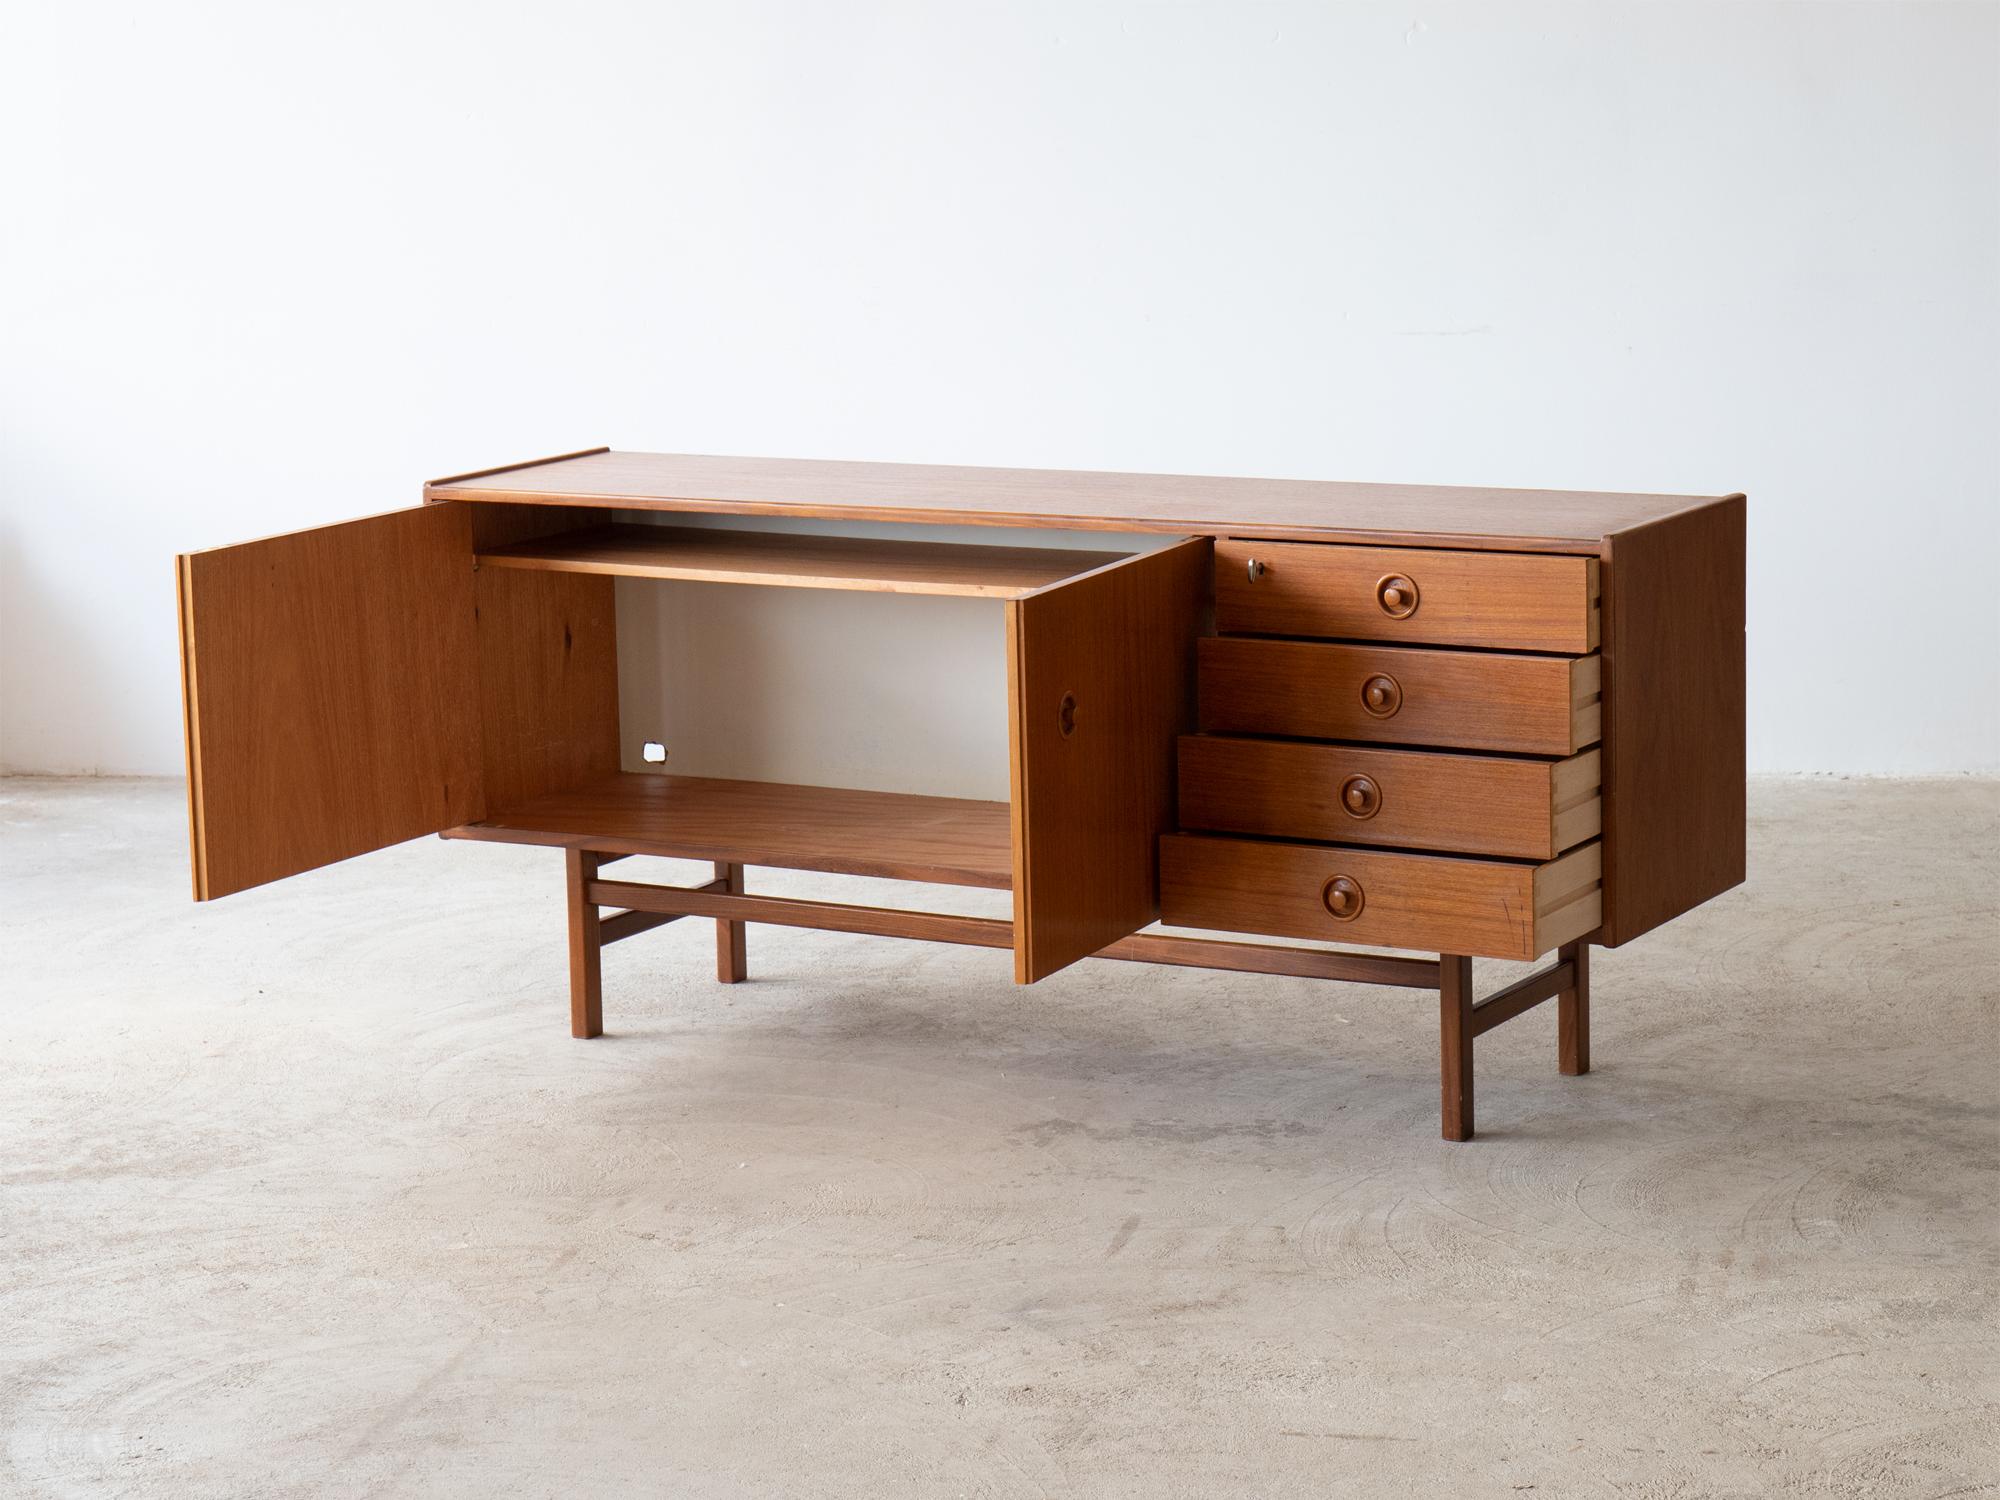 A mid-century teak & teak-veneered sideboard.

Swedish, circa 1960.

Four vertical drawers, the top partitioned, sit beside a two-door cupboard with internal shelving.

In good order. Structurally sound with working locks & keys. Cosmetic wear